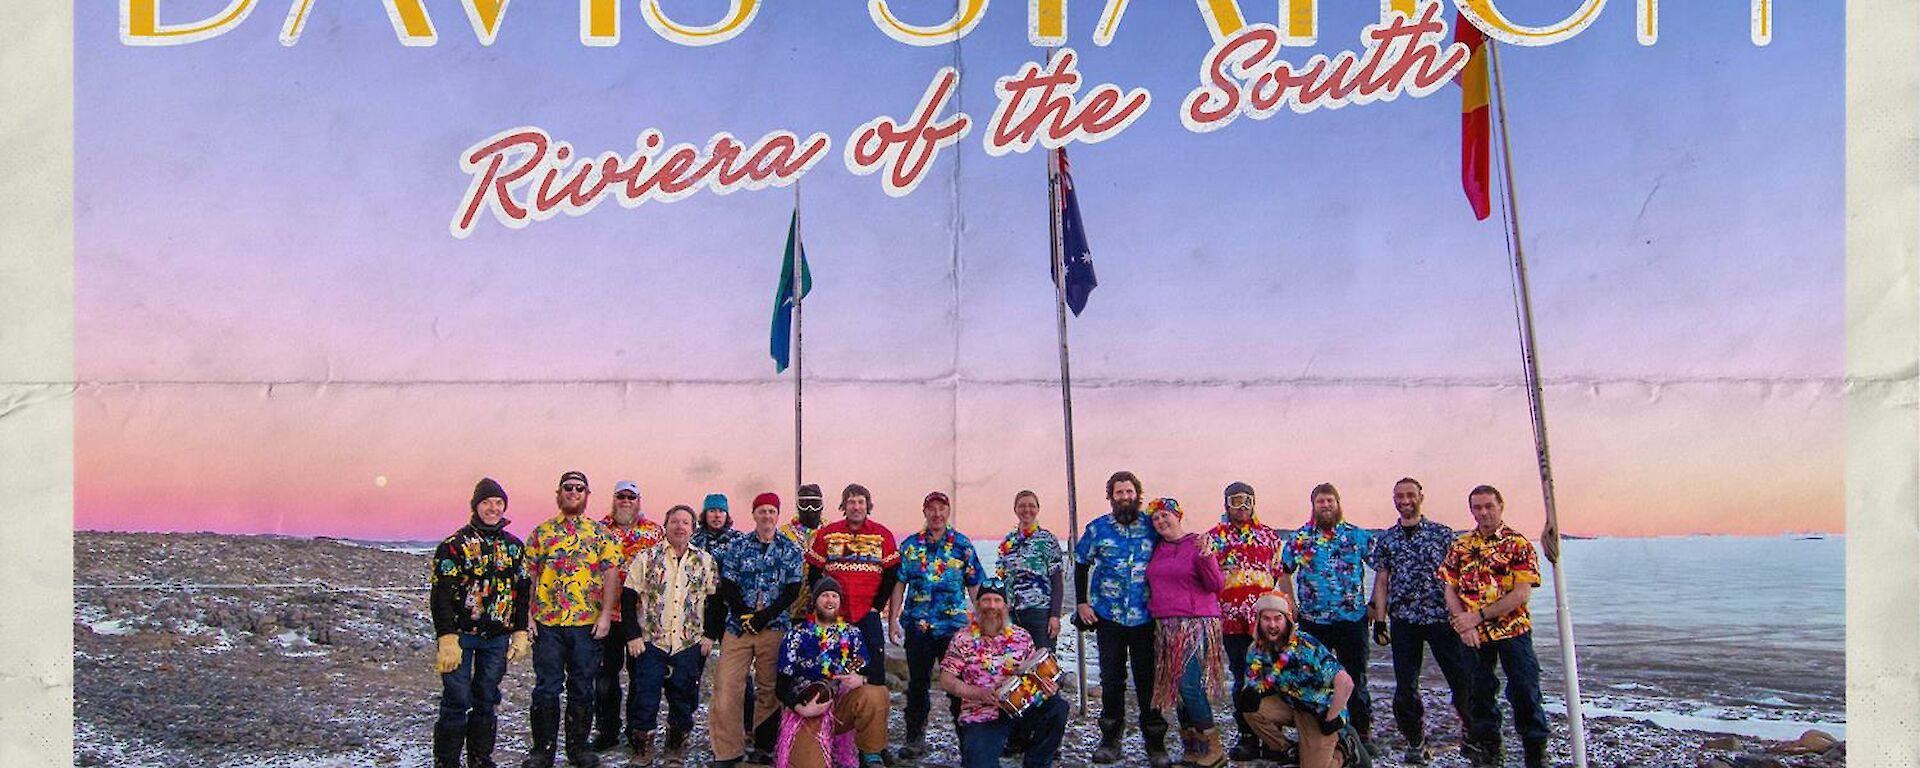 Group photo of station expeditioners all wearing Hawaiian shirts under the flag poles on a blue sky day with a red sun haze on the horizon.